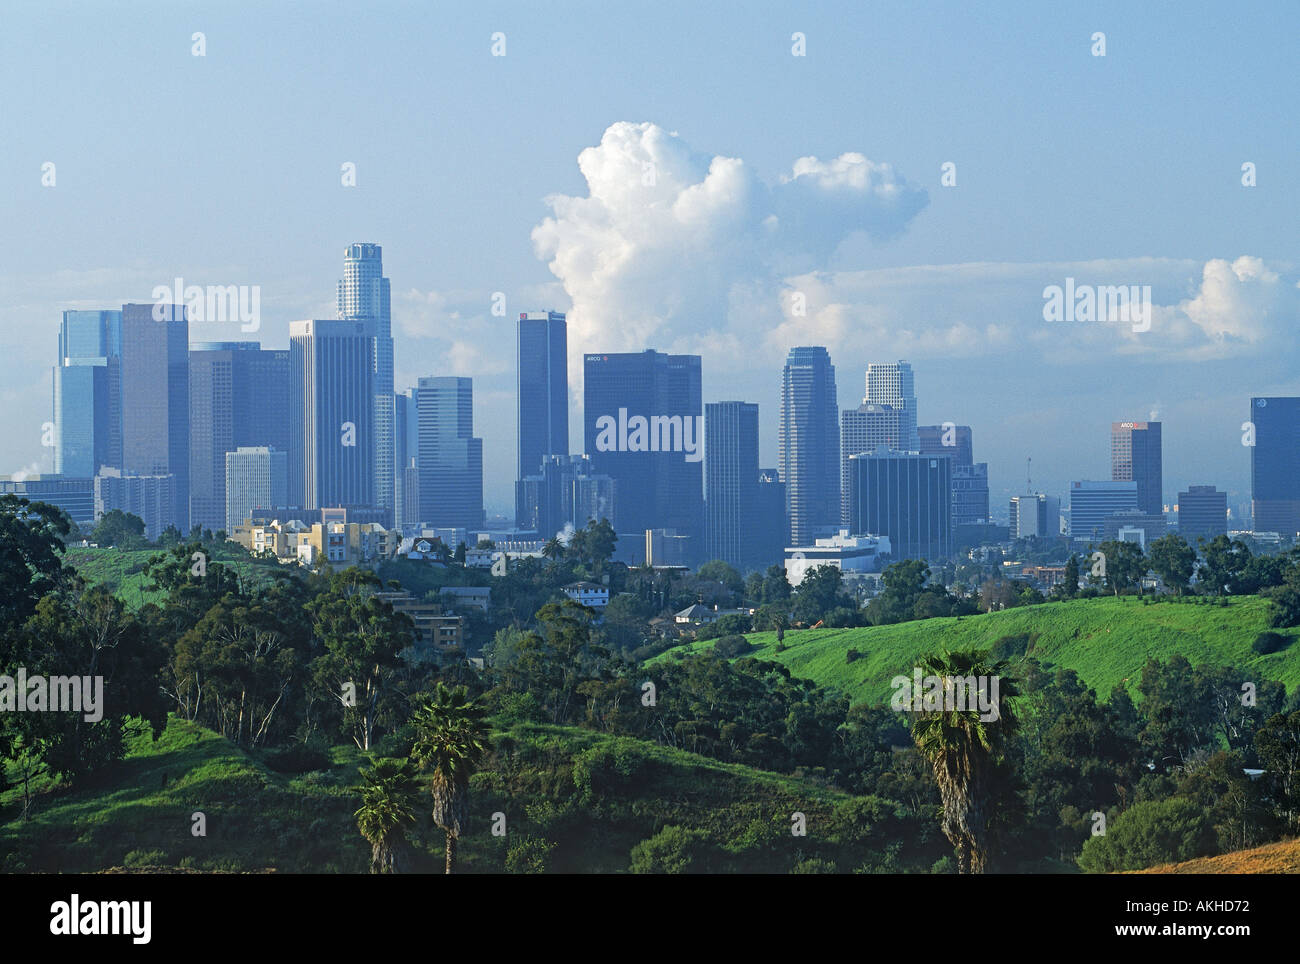 Downtown Los Angeles skyline from Elysian Park Stock Photo